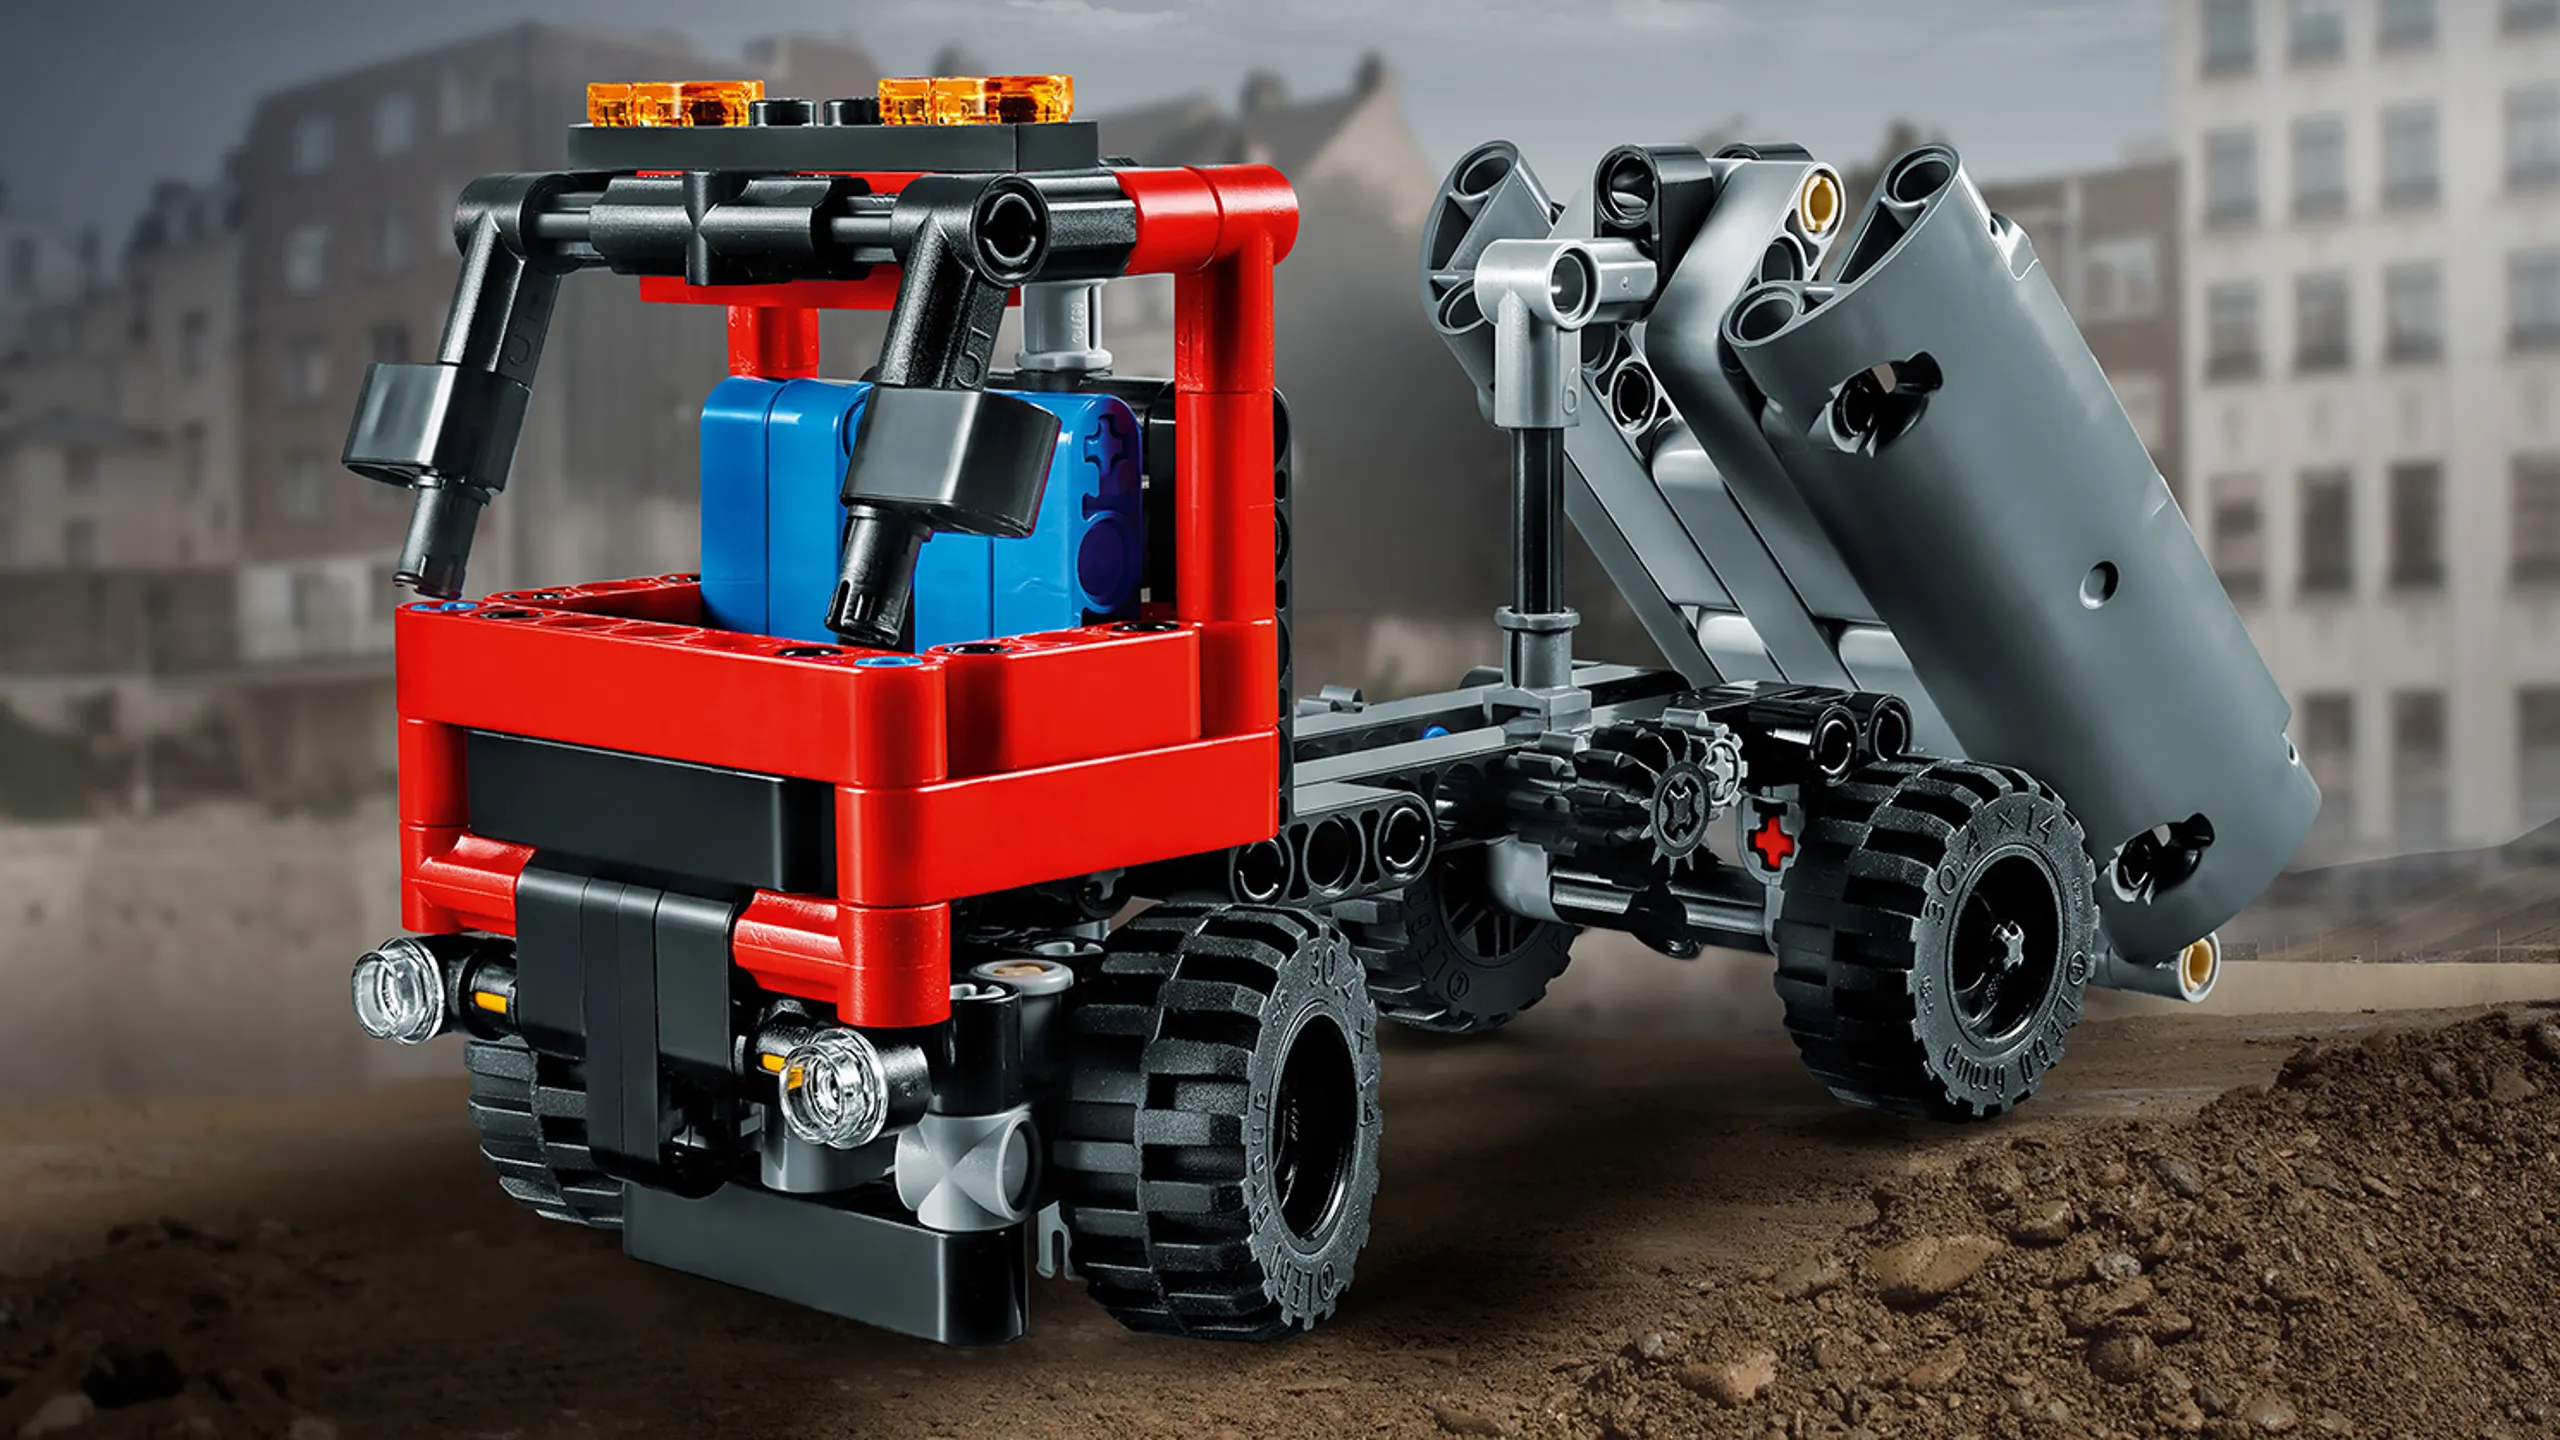 LEGO Technic - 42084 Hook Loader - This robust replica of a real-life hook loader truck comes with a driver’s cab, heavy-duty tires, large warning light and a cool red, gray and black color scheme.